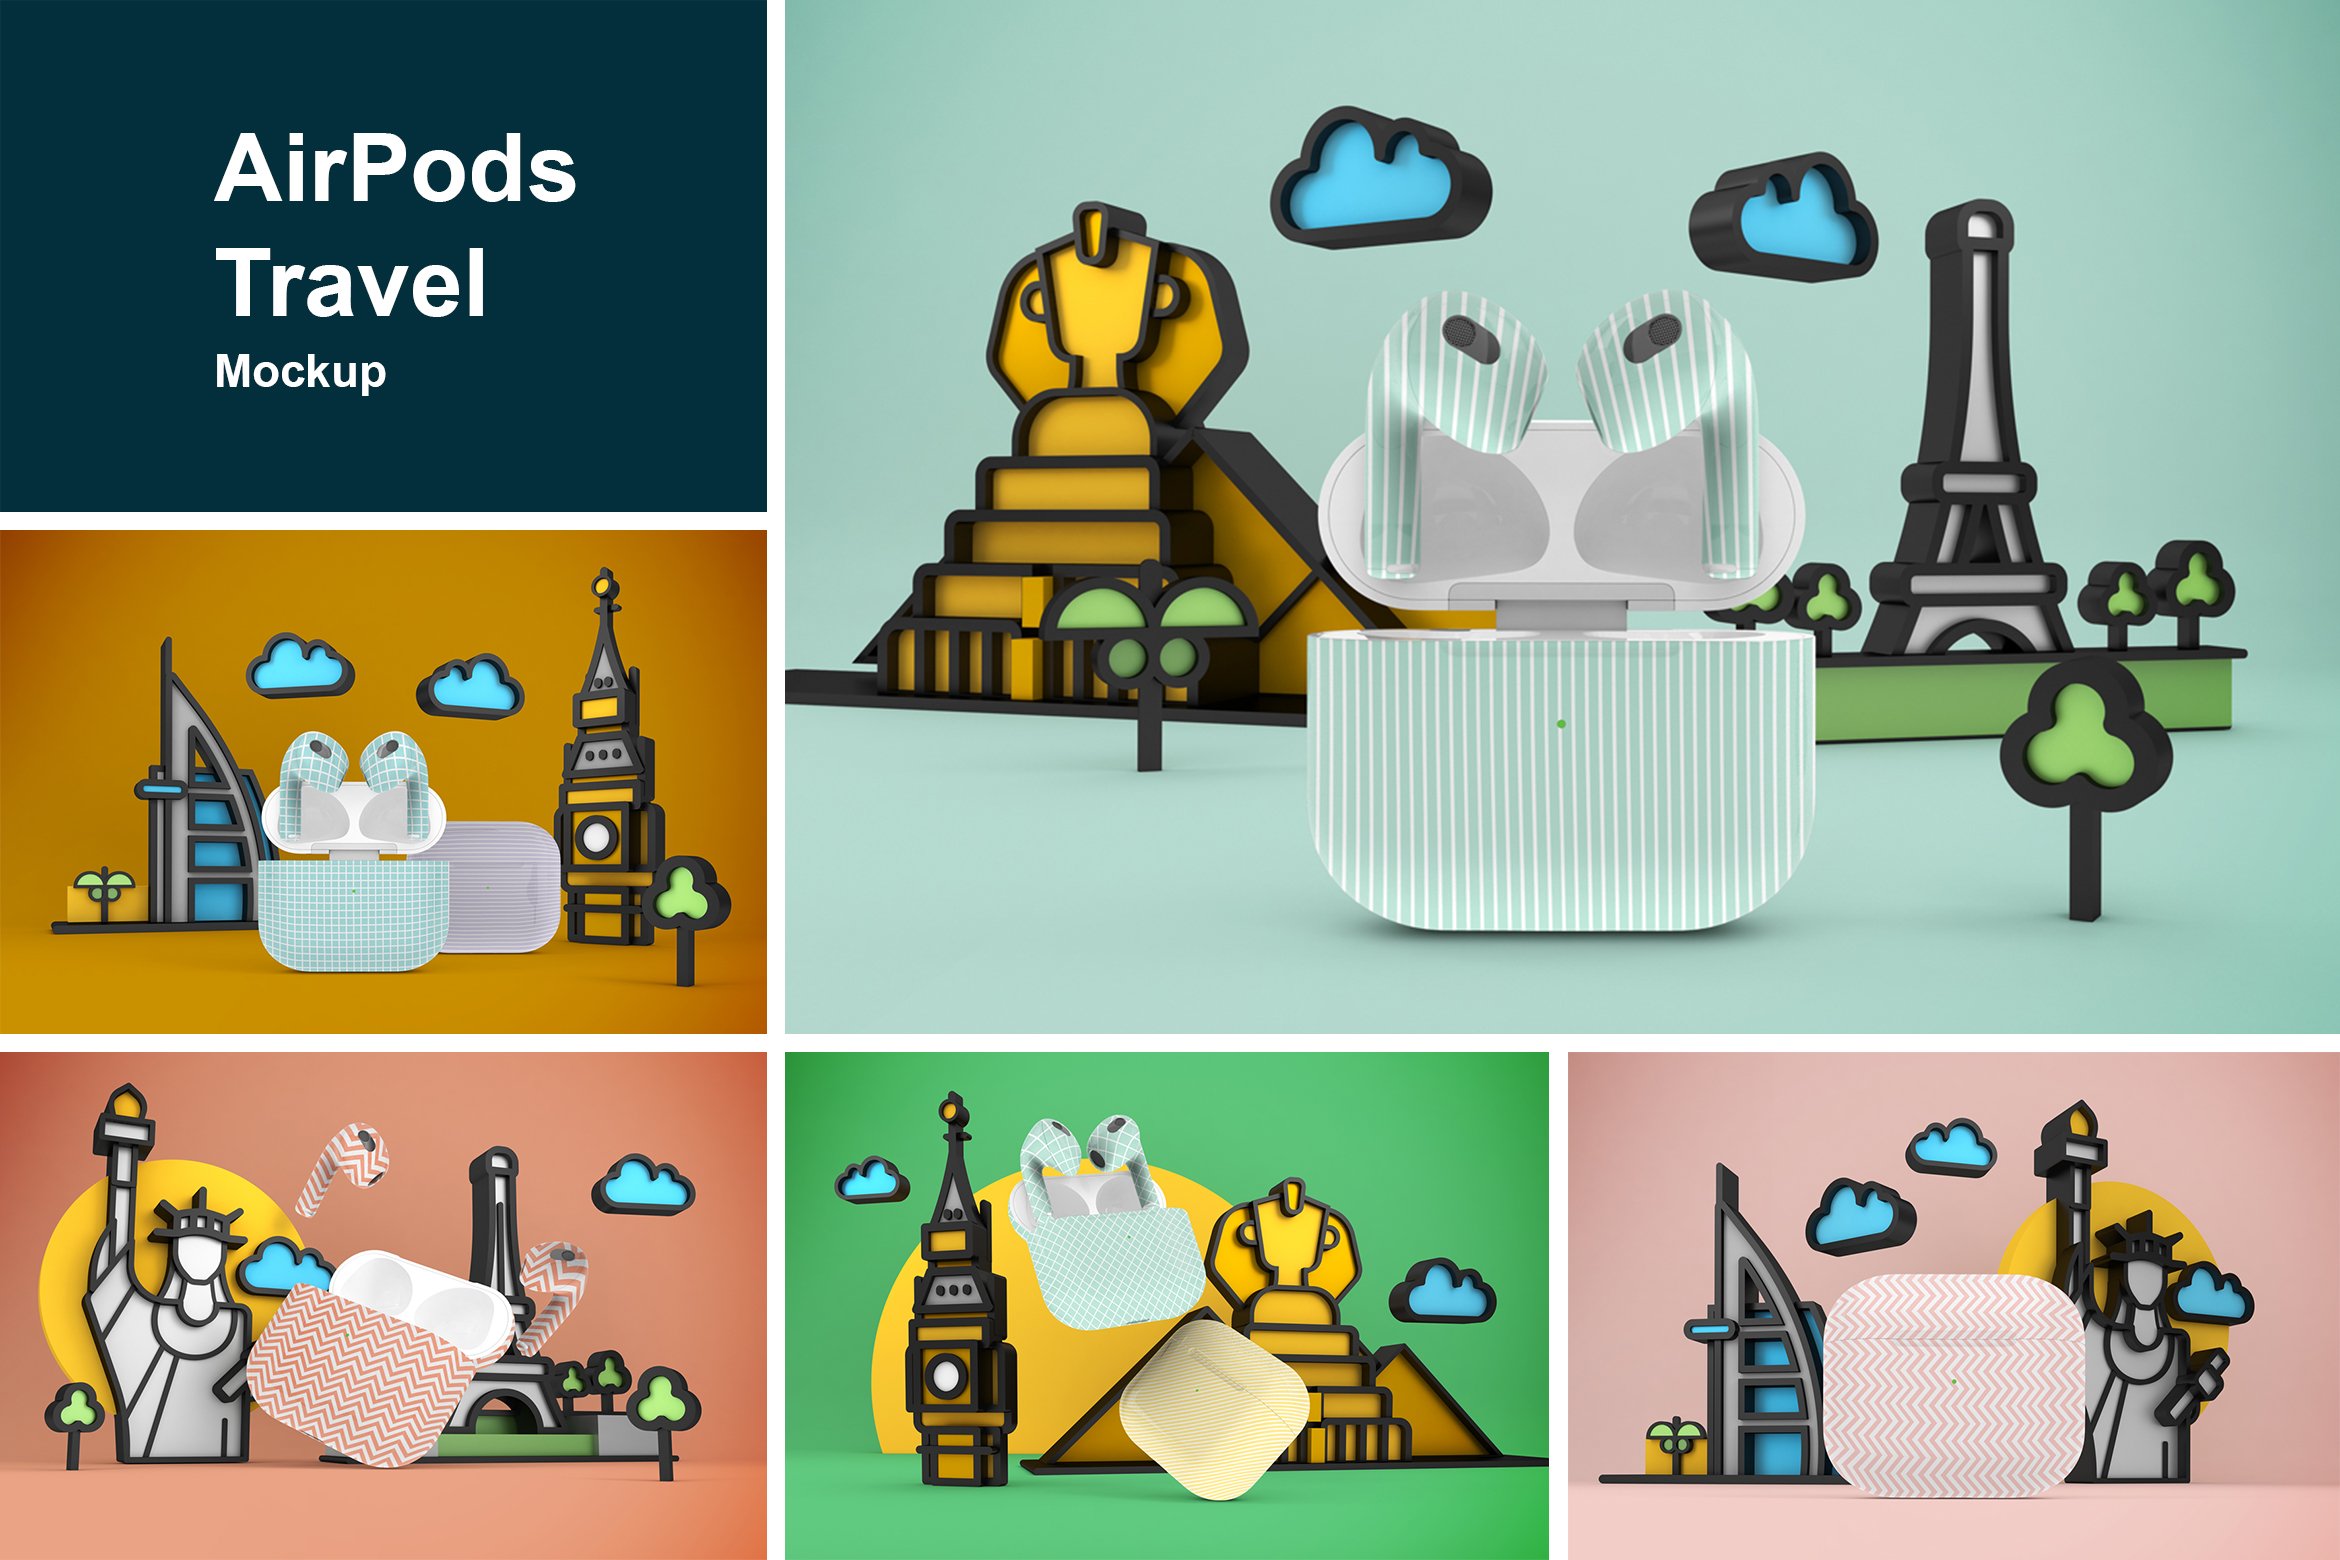 AirPods Travel Mockup cover image.